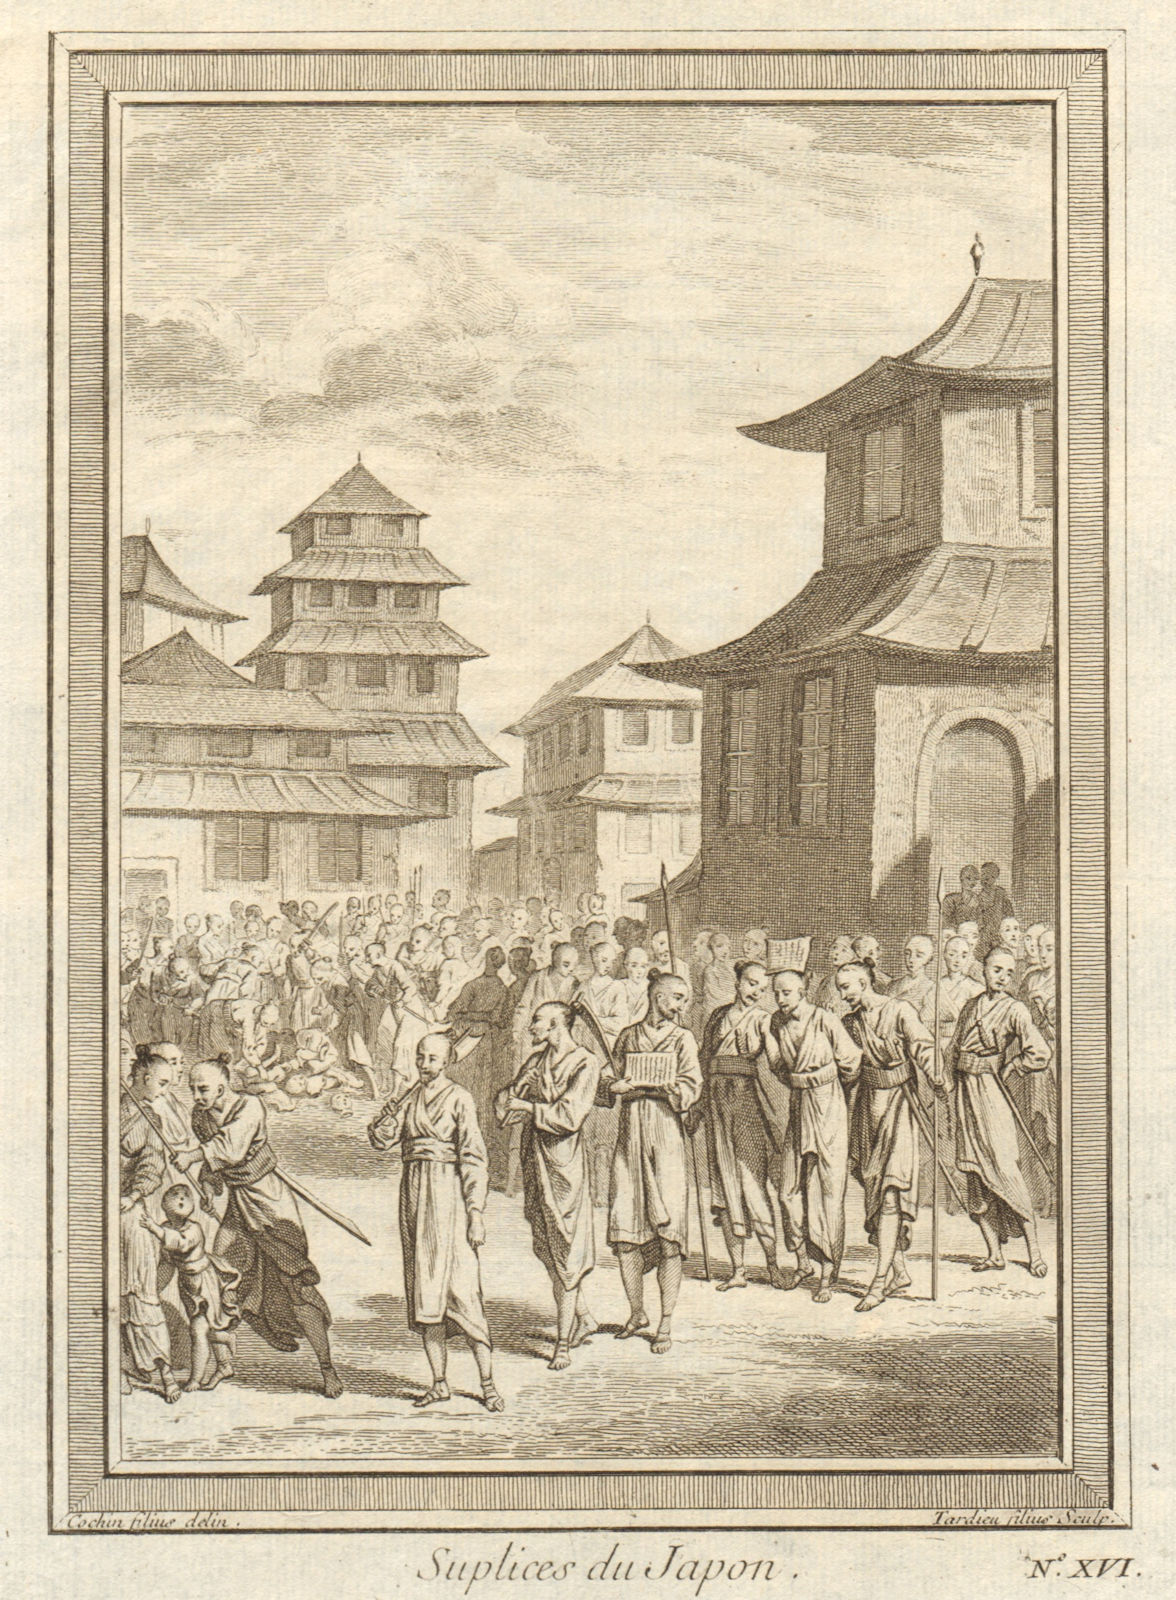 'Suplices du Japon'. Japanese punishments. Execution by sword 1746 old print